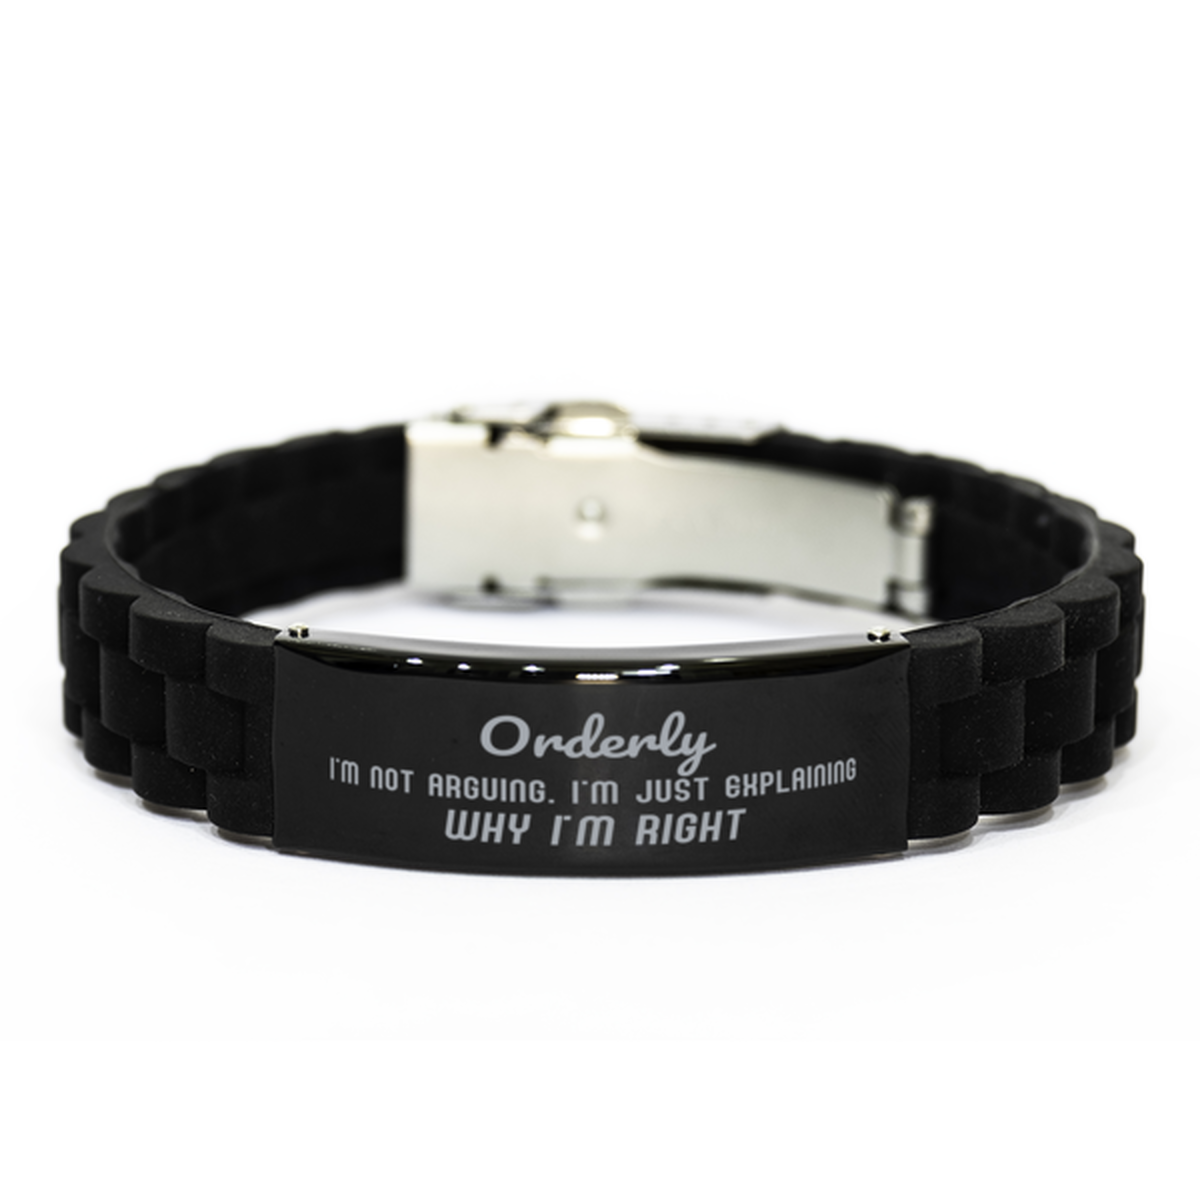 Orderly I'm not Arguing. I'm Just Explaining Why I'm RIGHT Black Glidelock Clasp Bracelet, Funny Saying Quote Orderly Gifts For Orderly Graduation Birthday Christmas Gifts for Men Women Coworker